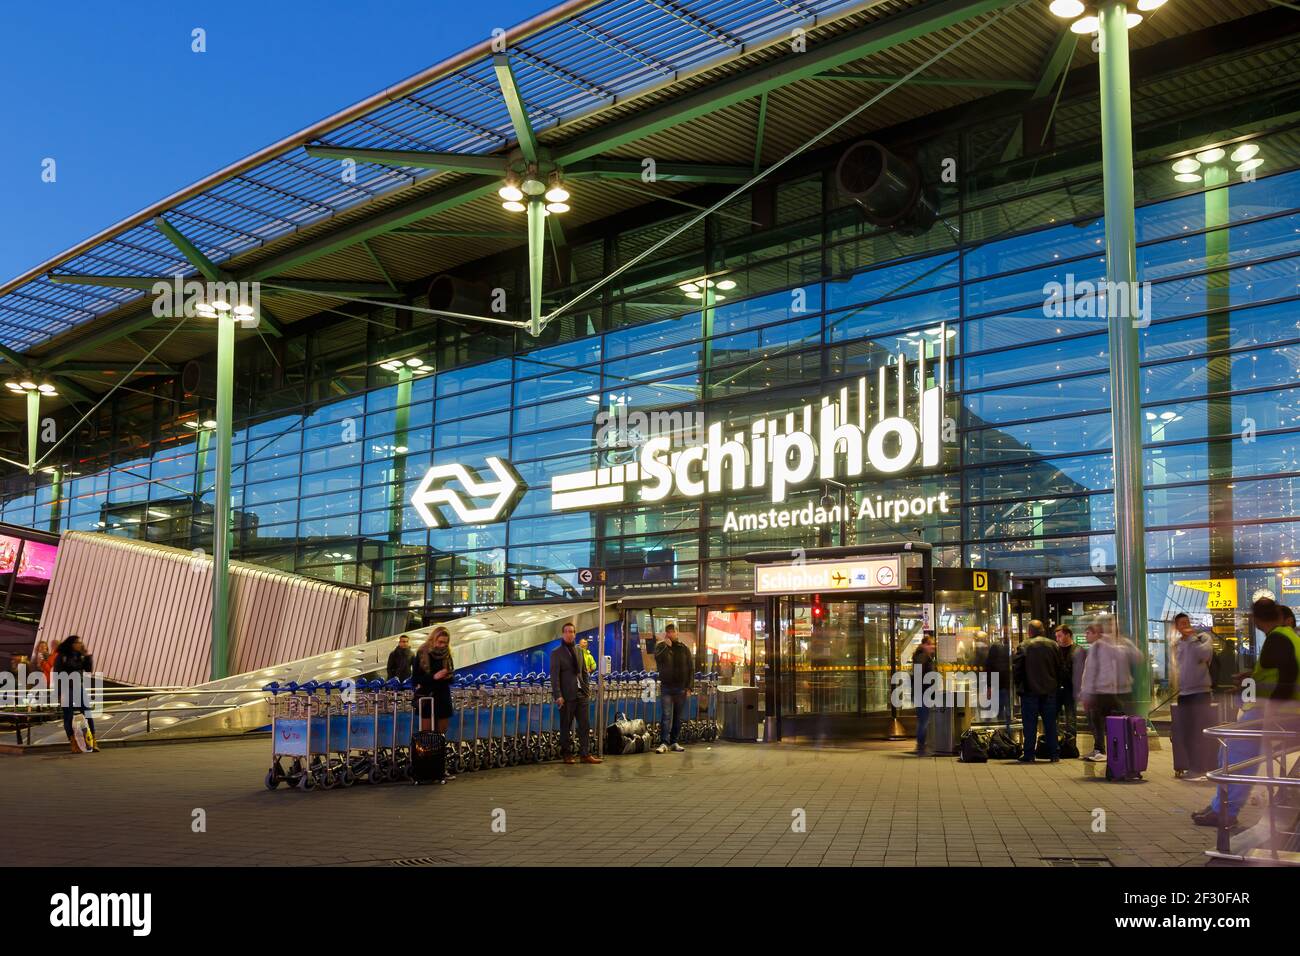 Amsterdam, Netherlands - November 22, 2017: Terminal at Amsterdam Schiphol Airport (AMS) in the Netherlands. Stock Photo